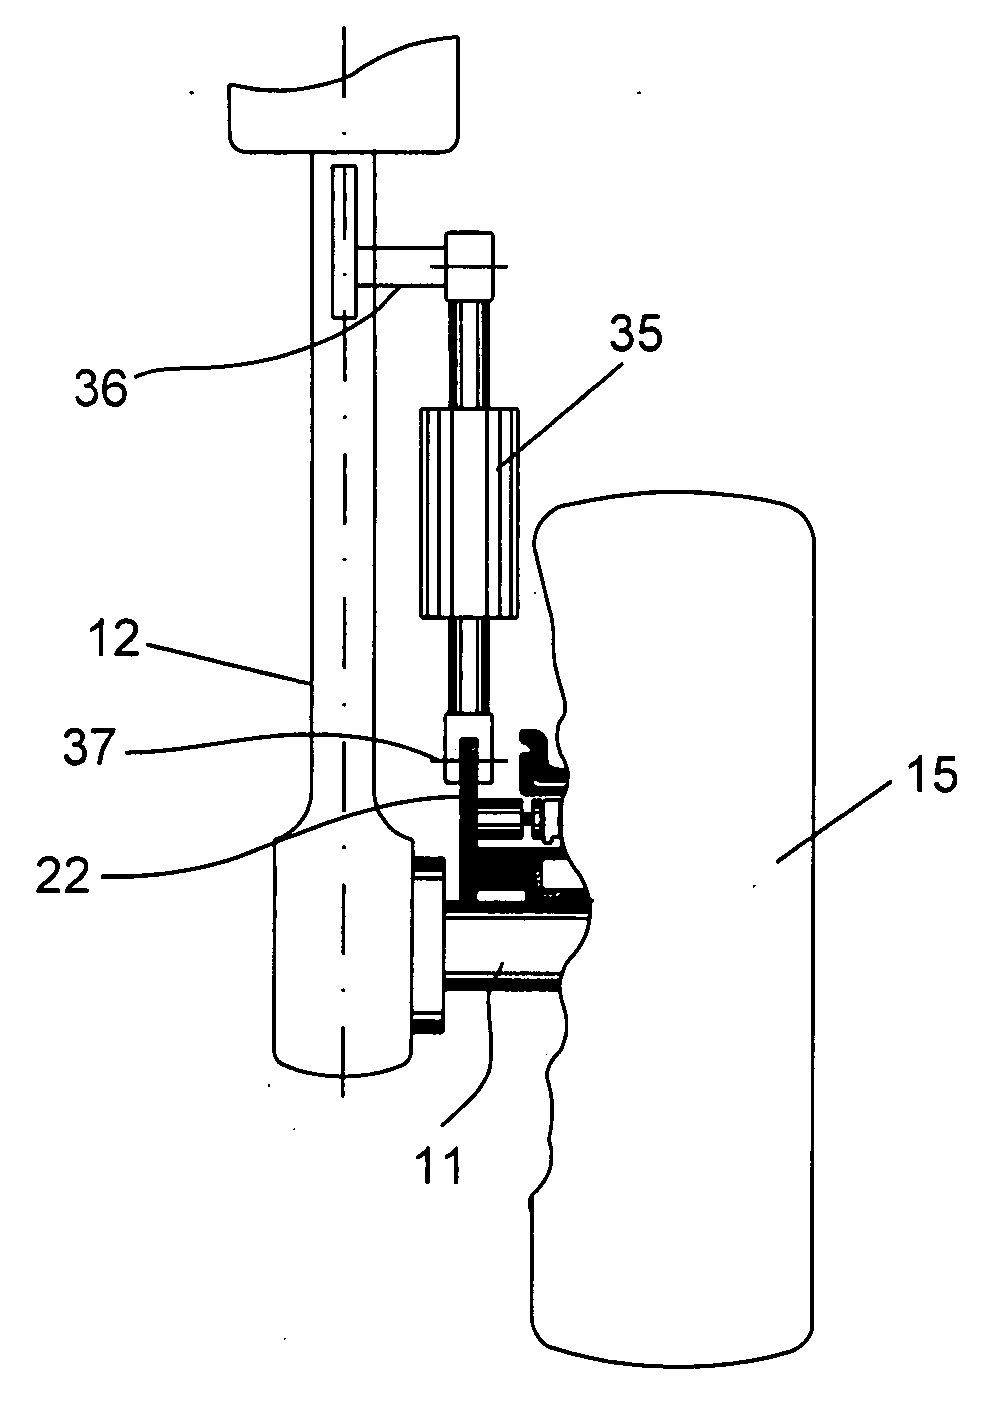 Device and method for a rotation of the wheels of the landing gear of aircraft